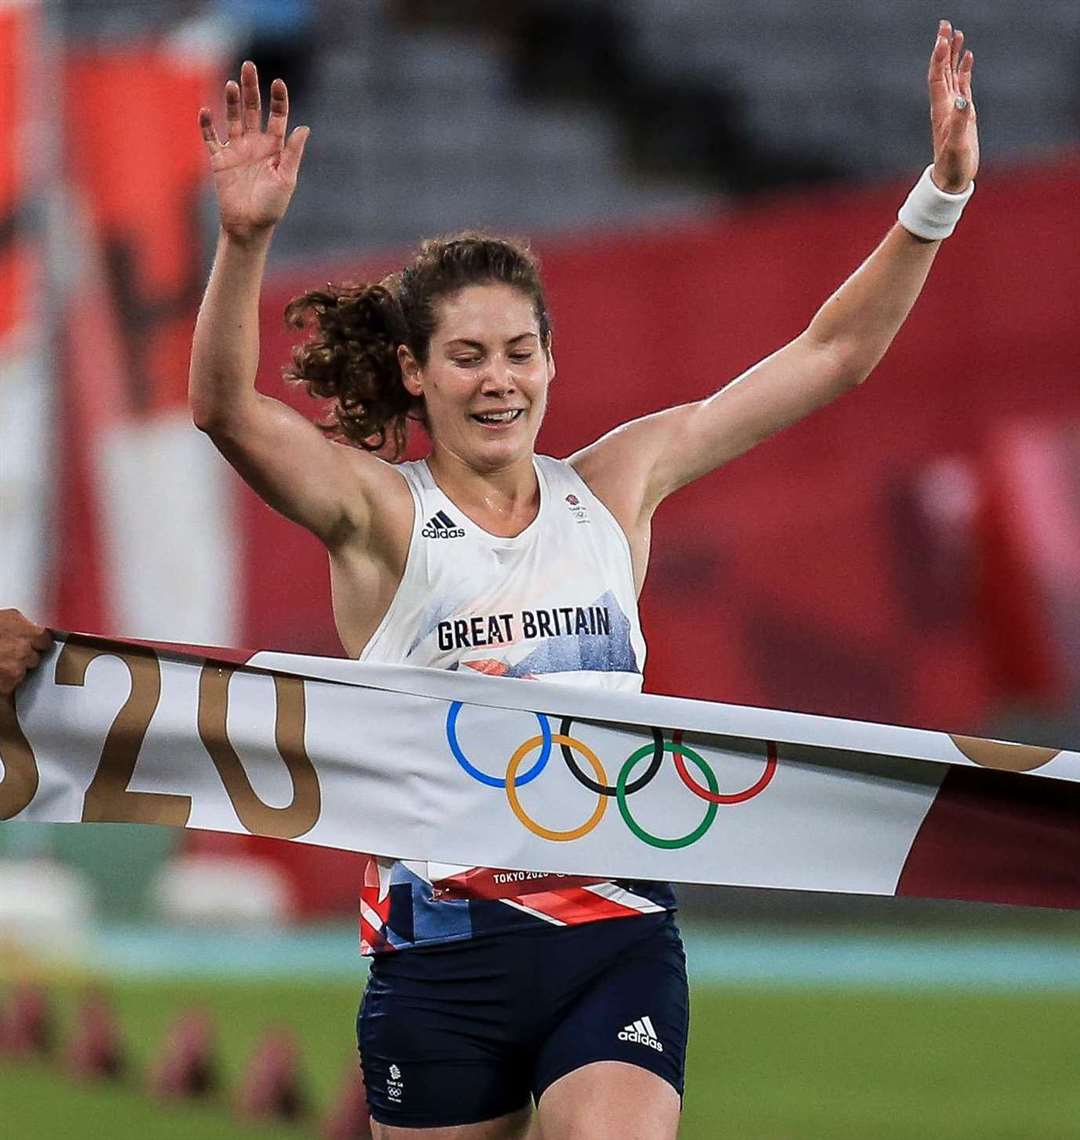 Meopham's Kate French won gold in the pentathlon at Tokyo three years ago. Picture: UPIM Media